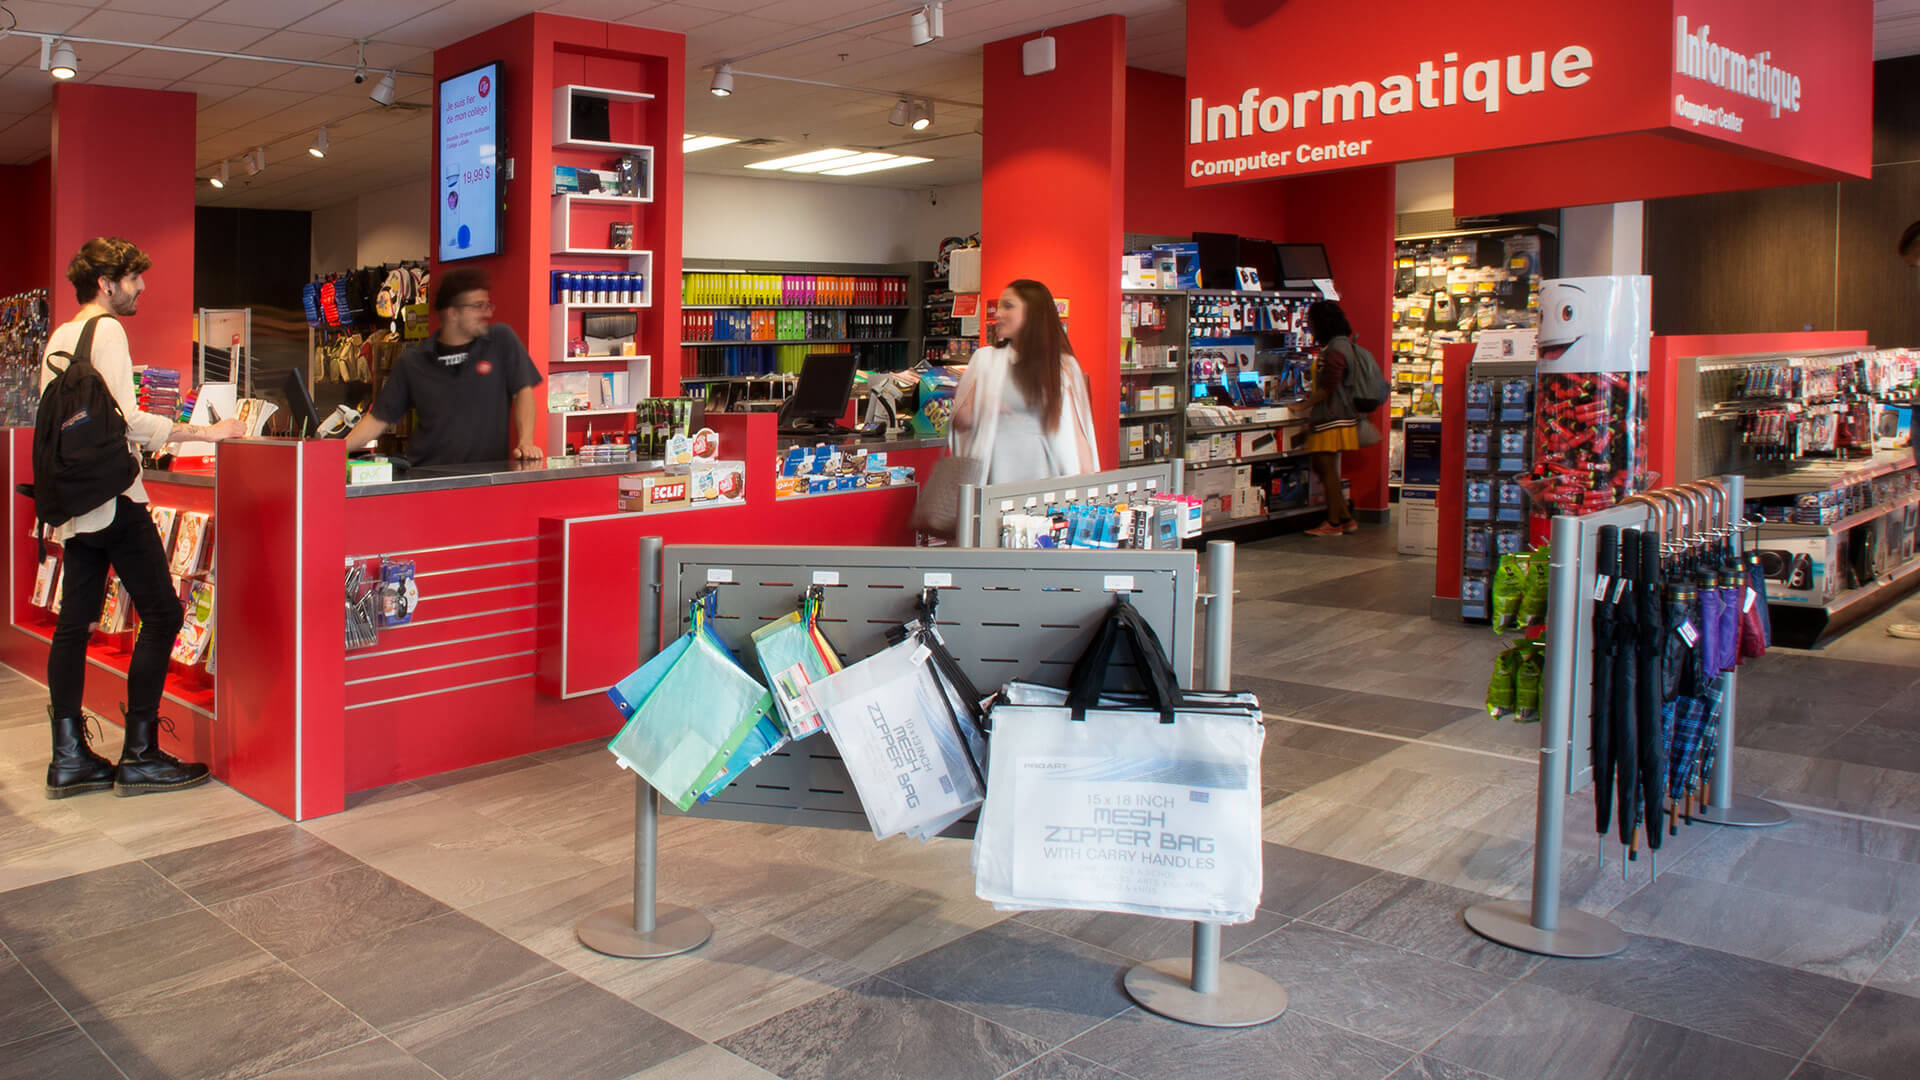 Customers browse products in a well-organized electronic store with vibrant red decor.